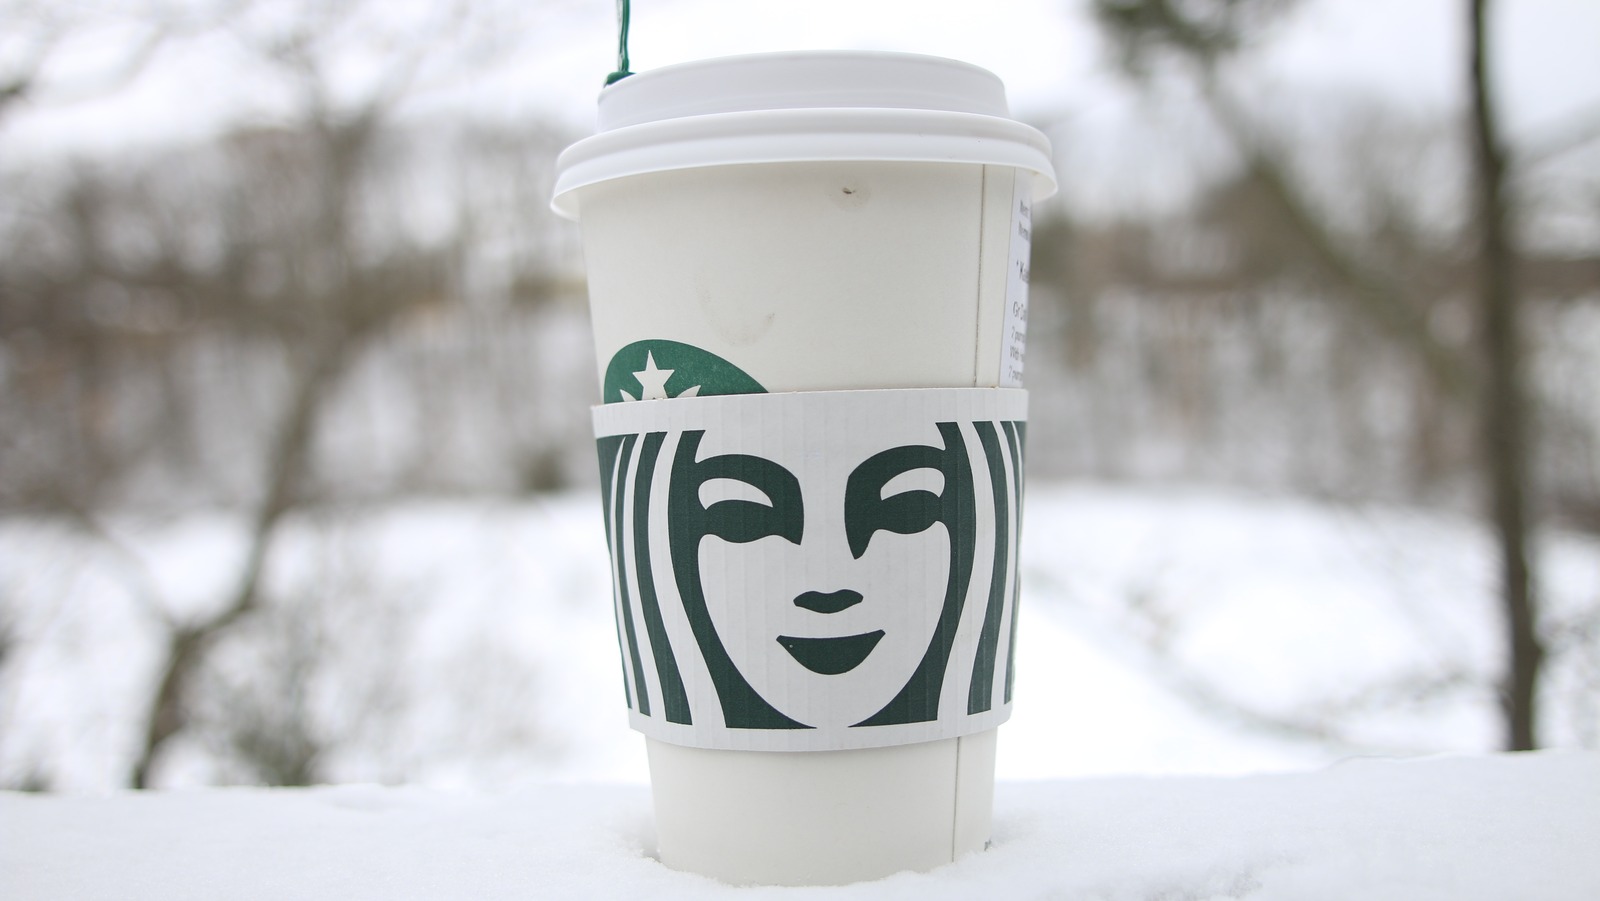 The Starbucks 'Ski-Thru' You May Not Have Known About